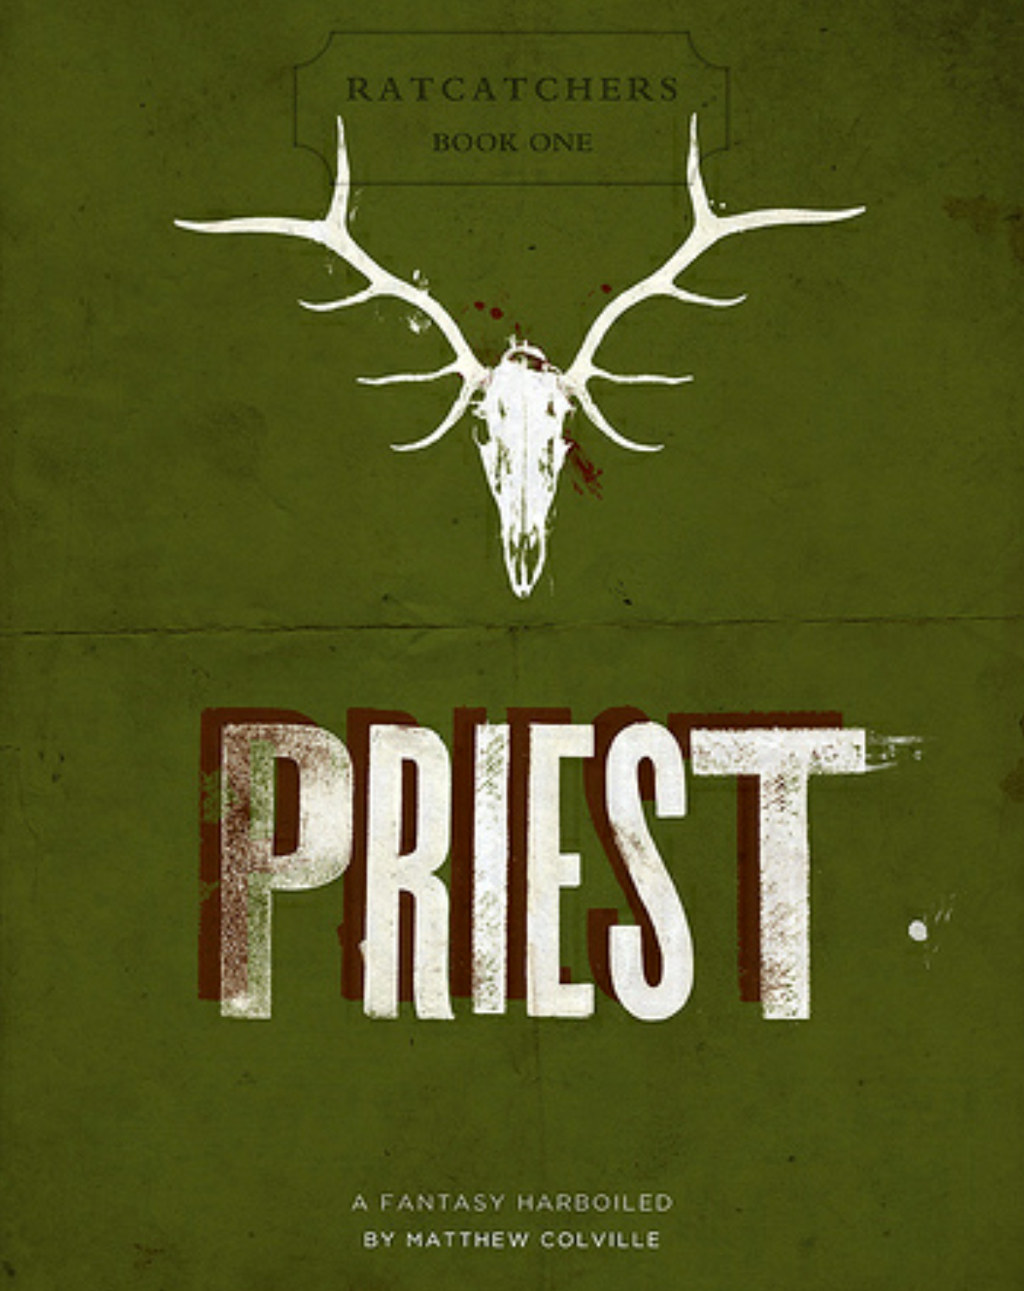 Priest Cover